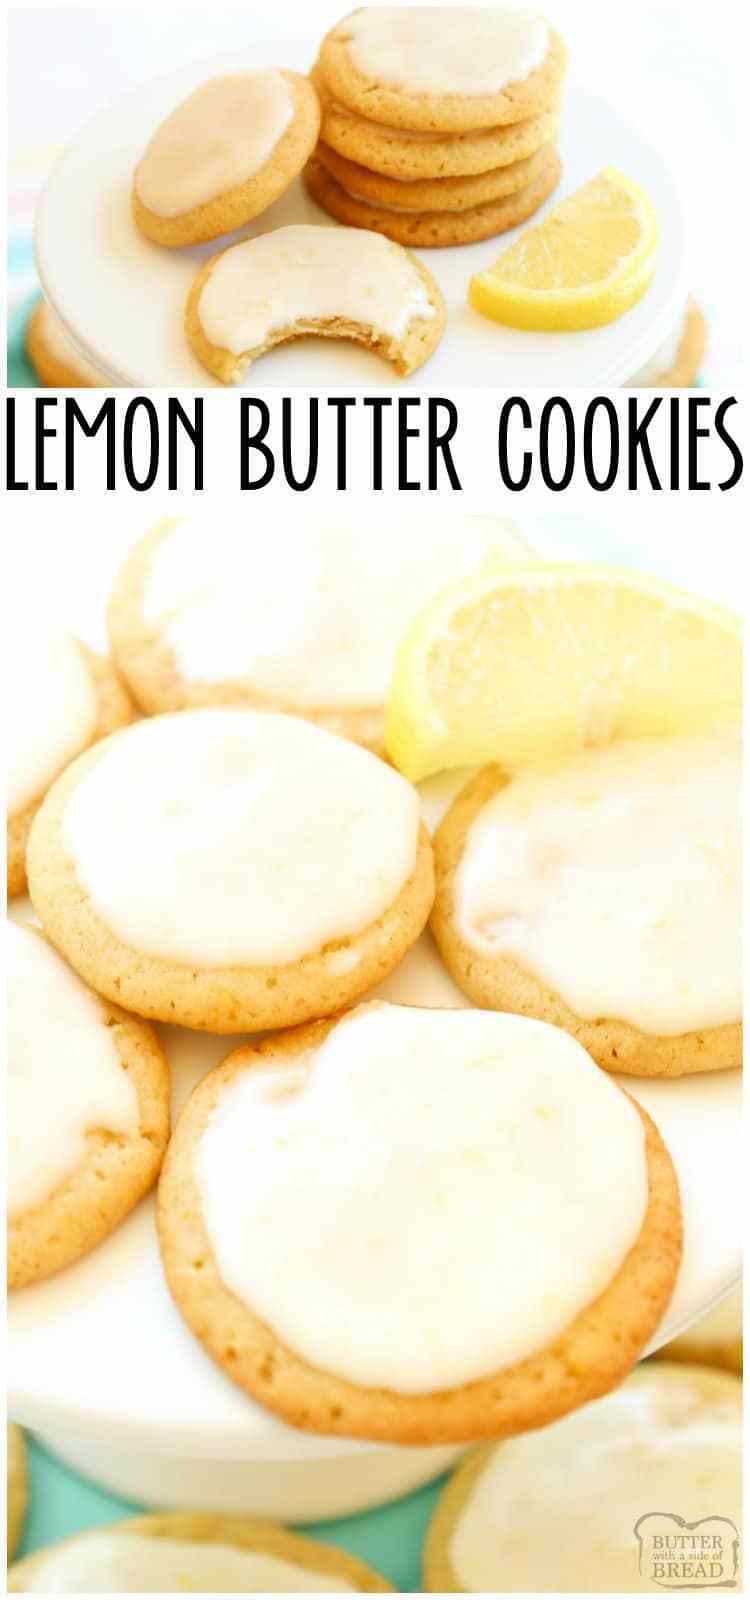 Lemon Butter Cookies is one of my favorite butter cookie recipes and lemon desserts! Every time I make them I'm surprised at just how GOOD these lemon cookies taste. #lemon #cookies #lemonbuttercookies #buttercookies #lemondessert #withicing #recipefrom Butter With a Side a Bread